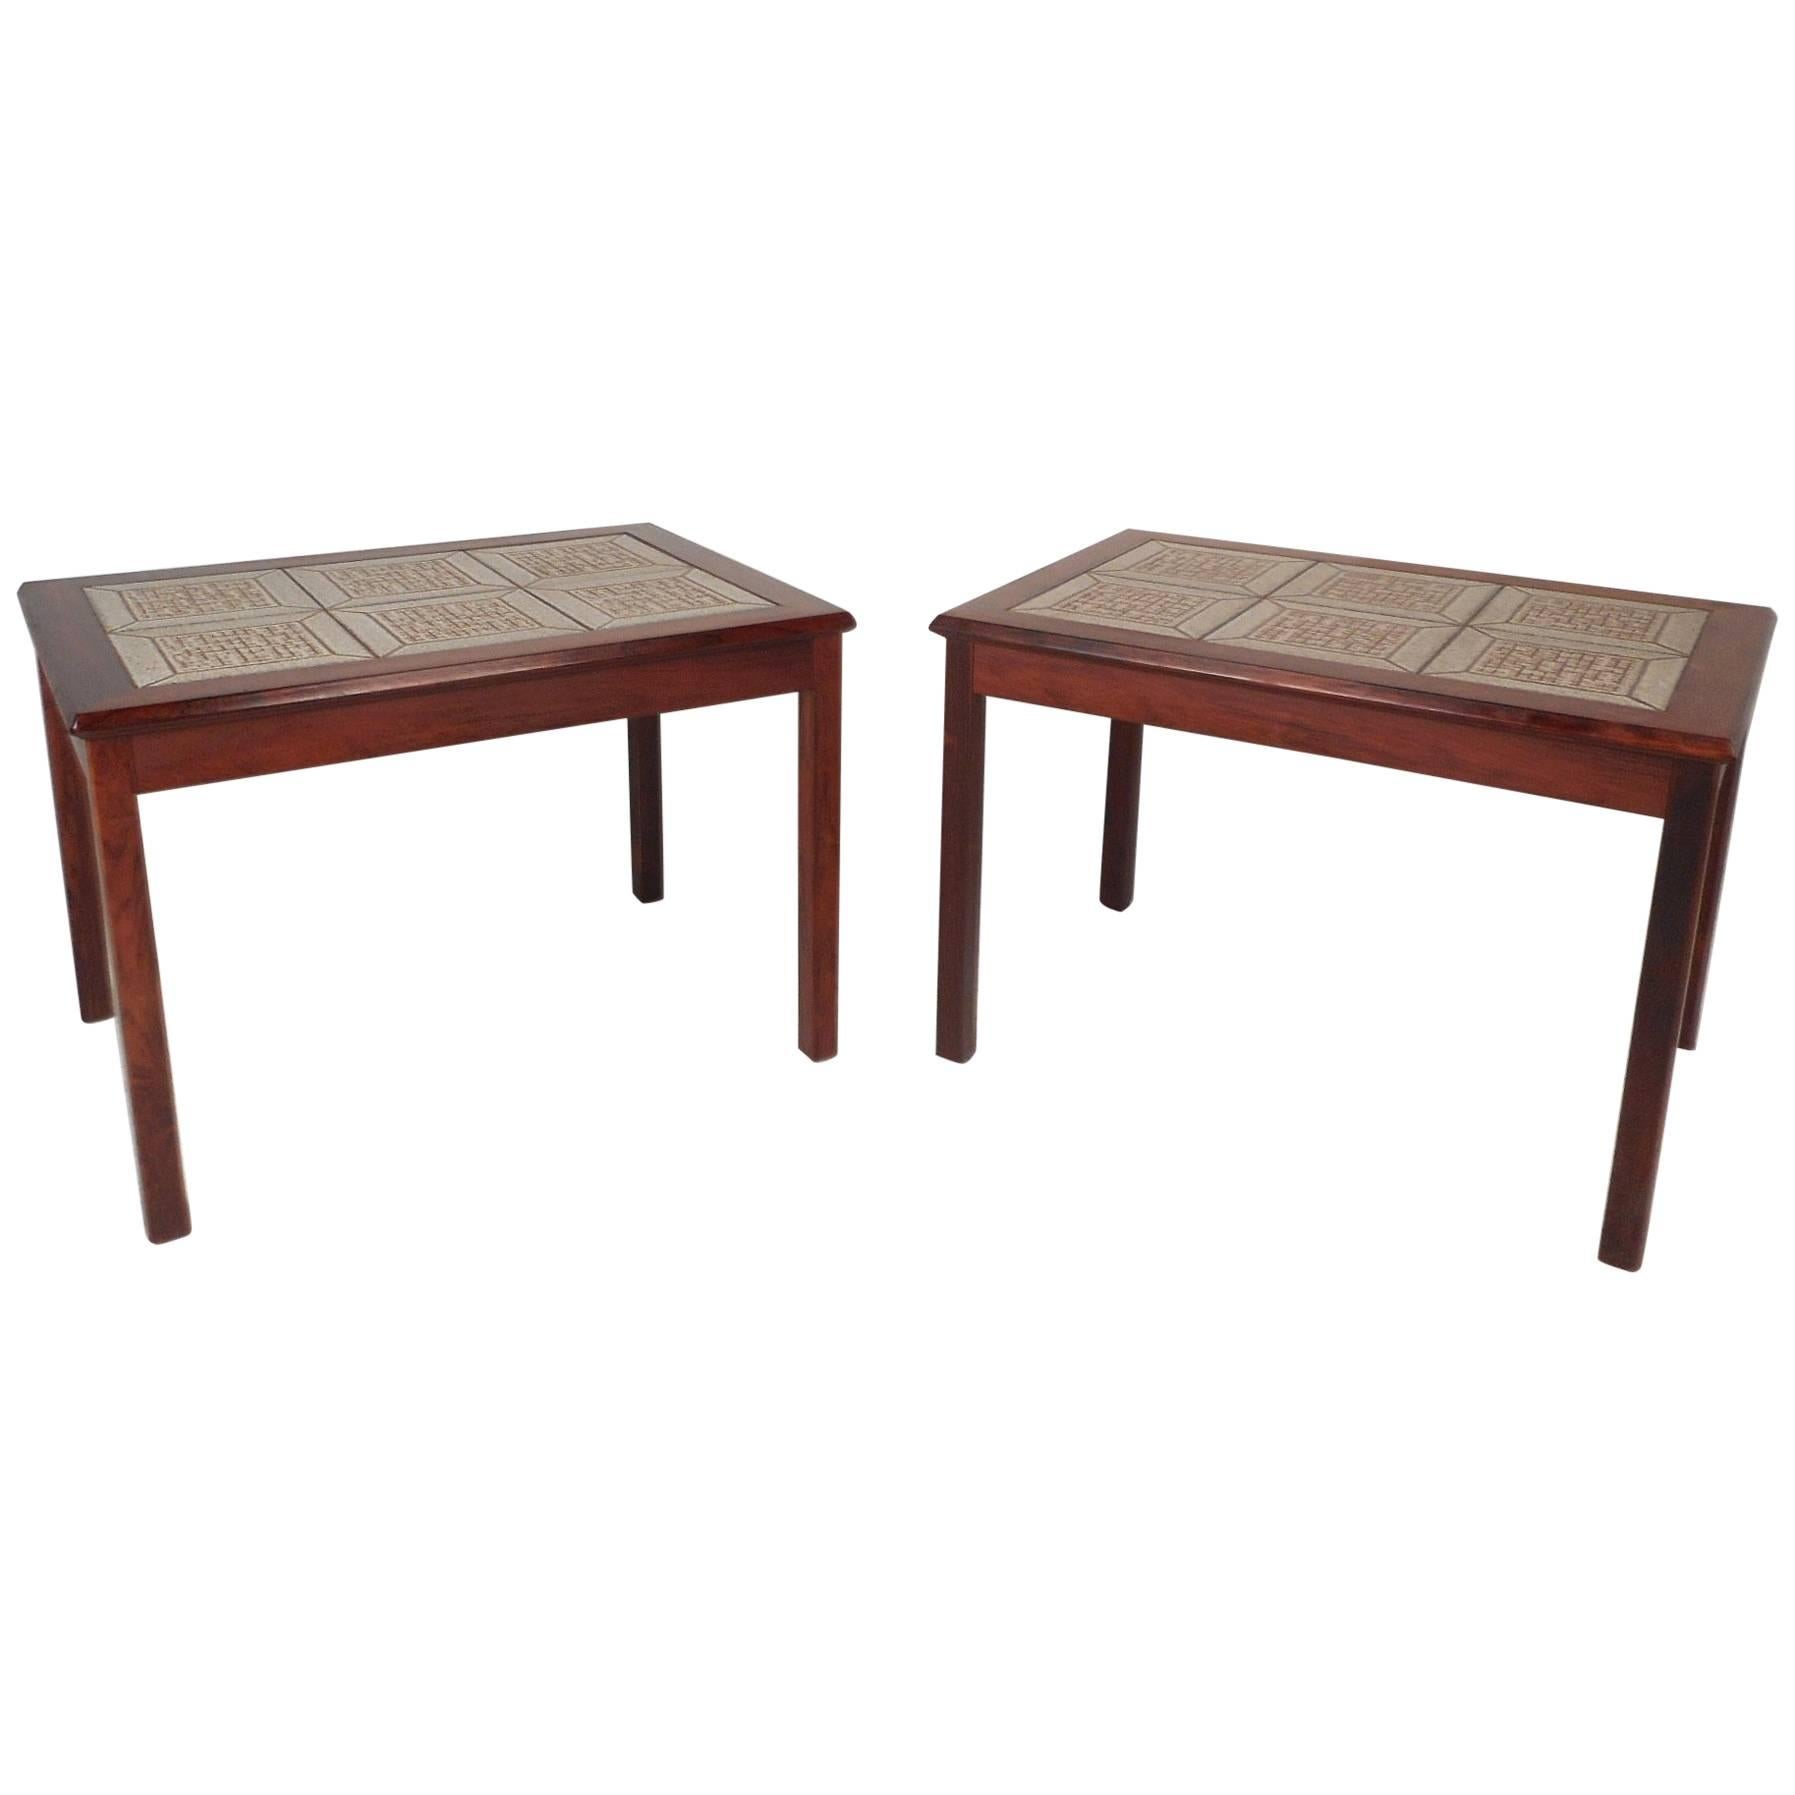 A fabulous pair of rosewood end tables with rosewood frames and a decorative tiled top. These beautiful pieces are stamped, 